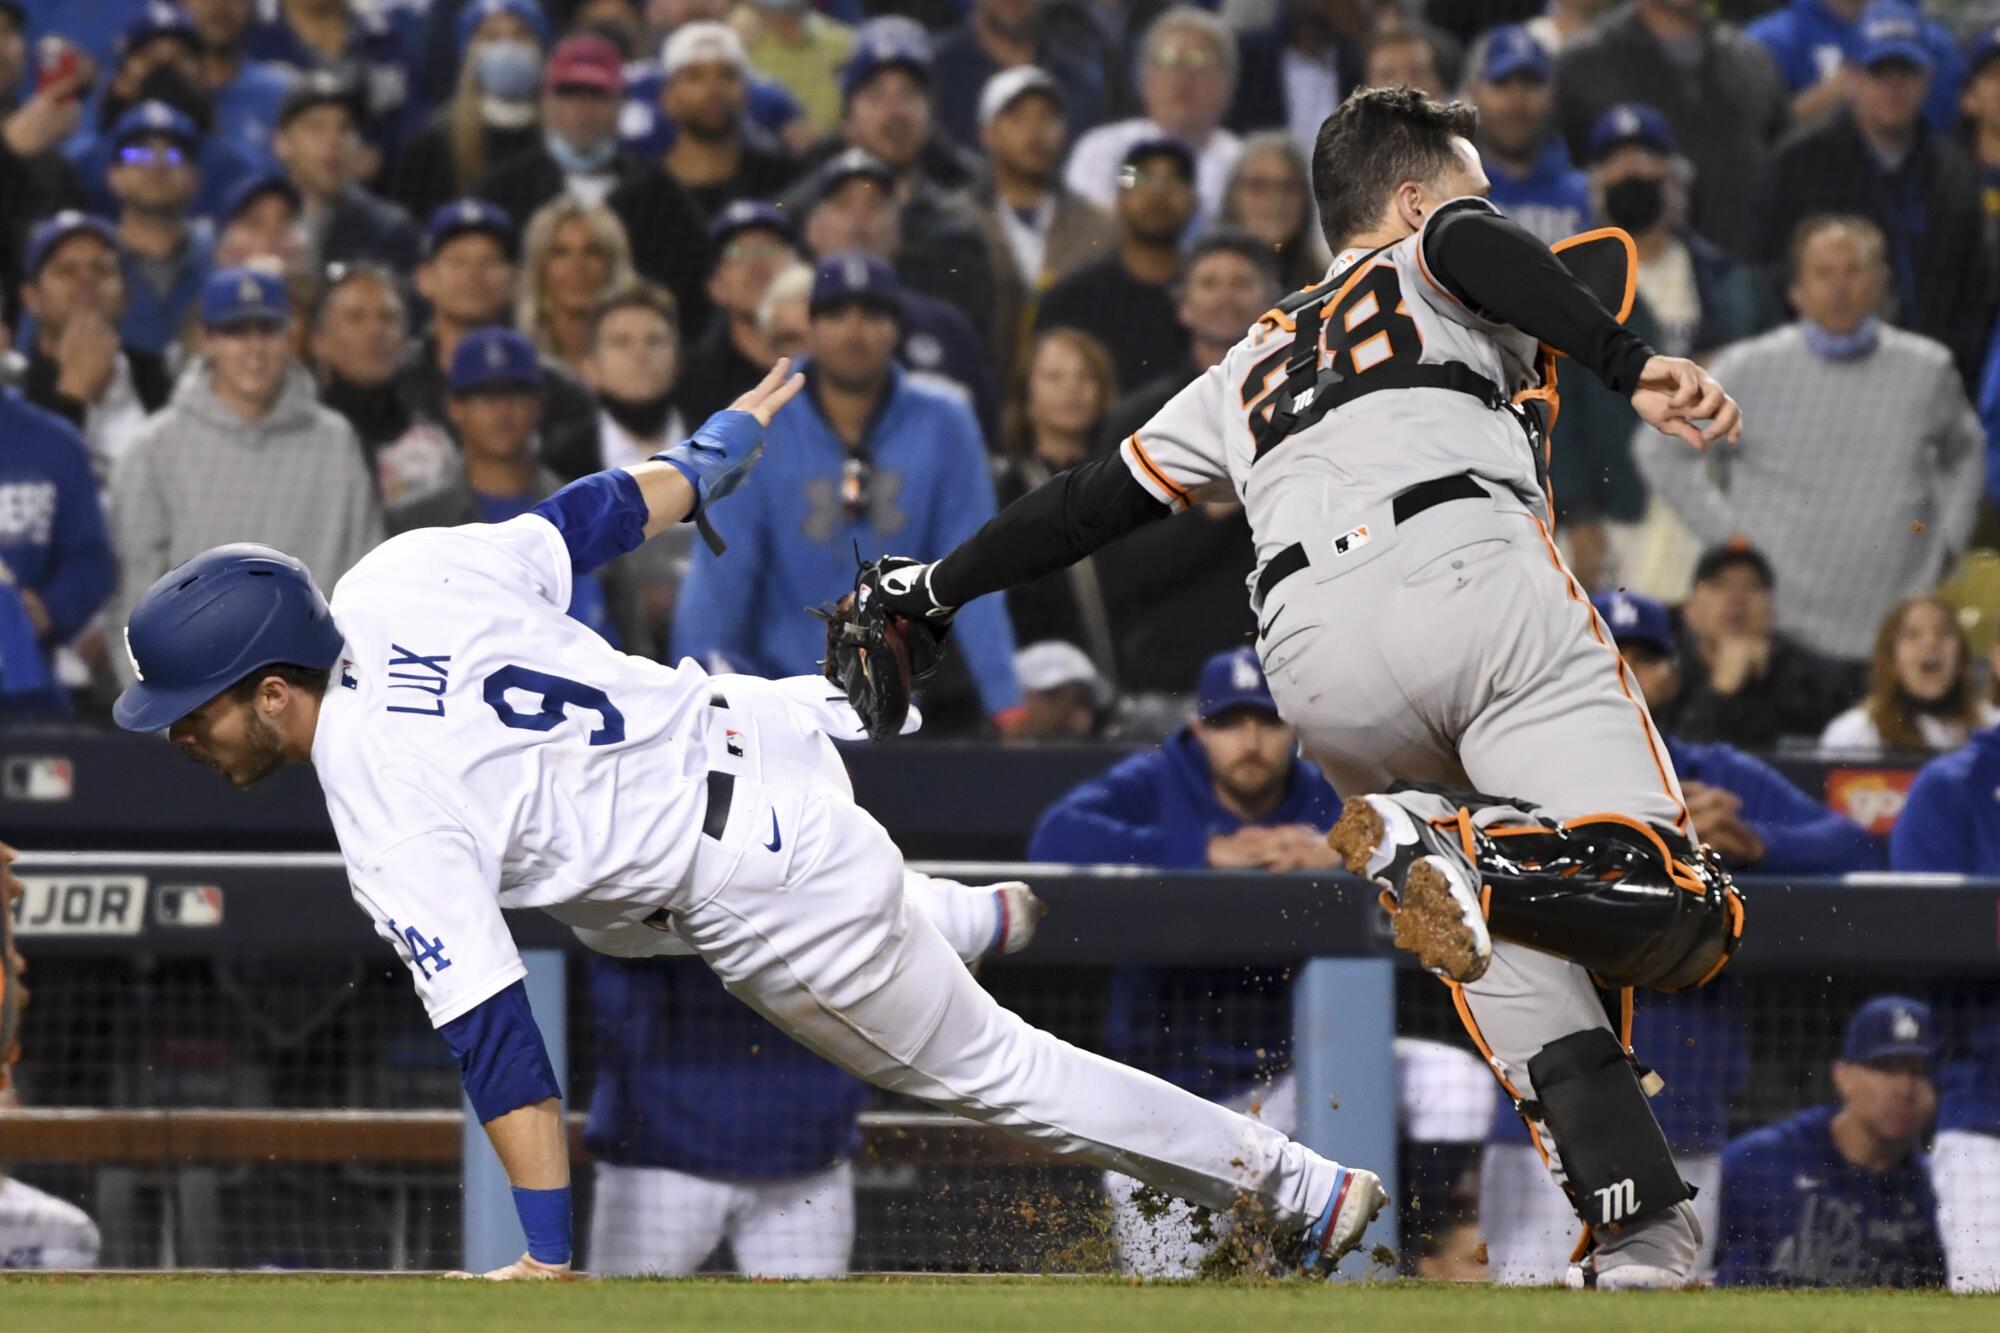  Giants catcher Buster Posey tags out Dodgers' Gavin Lux.